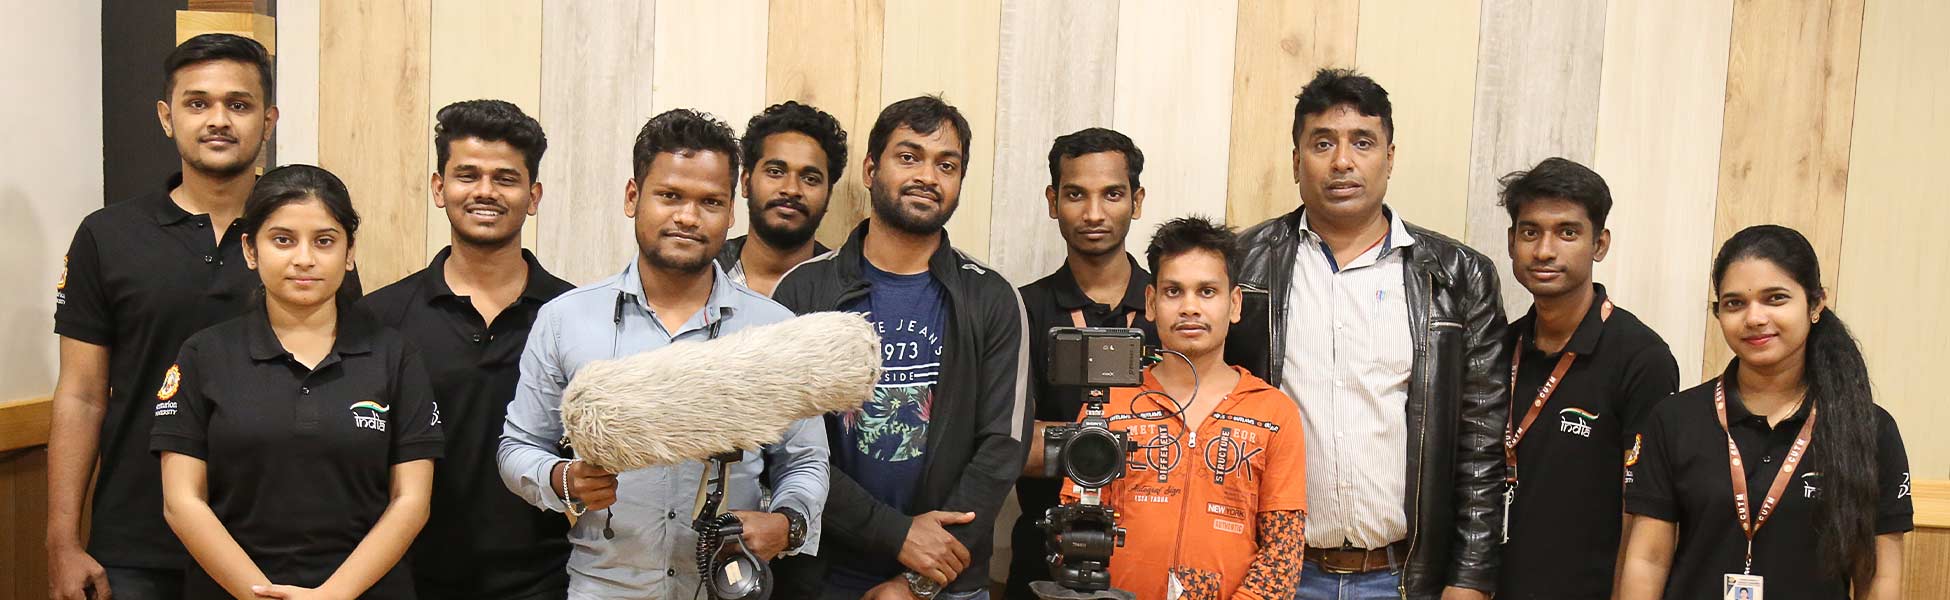 film production services in india, film production services in maharashtra, film production services in pune, video production services in india, video production services in maharashtra, video production services in pune, tv production services in india, tv production services in maharashtra, tv production services in pune, production services in india, production services in maharashtra, production services in pune